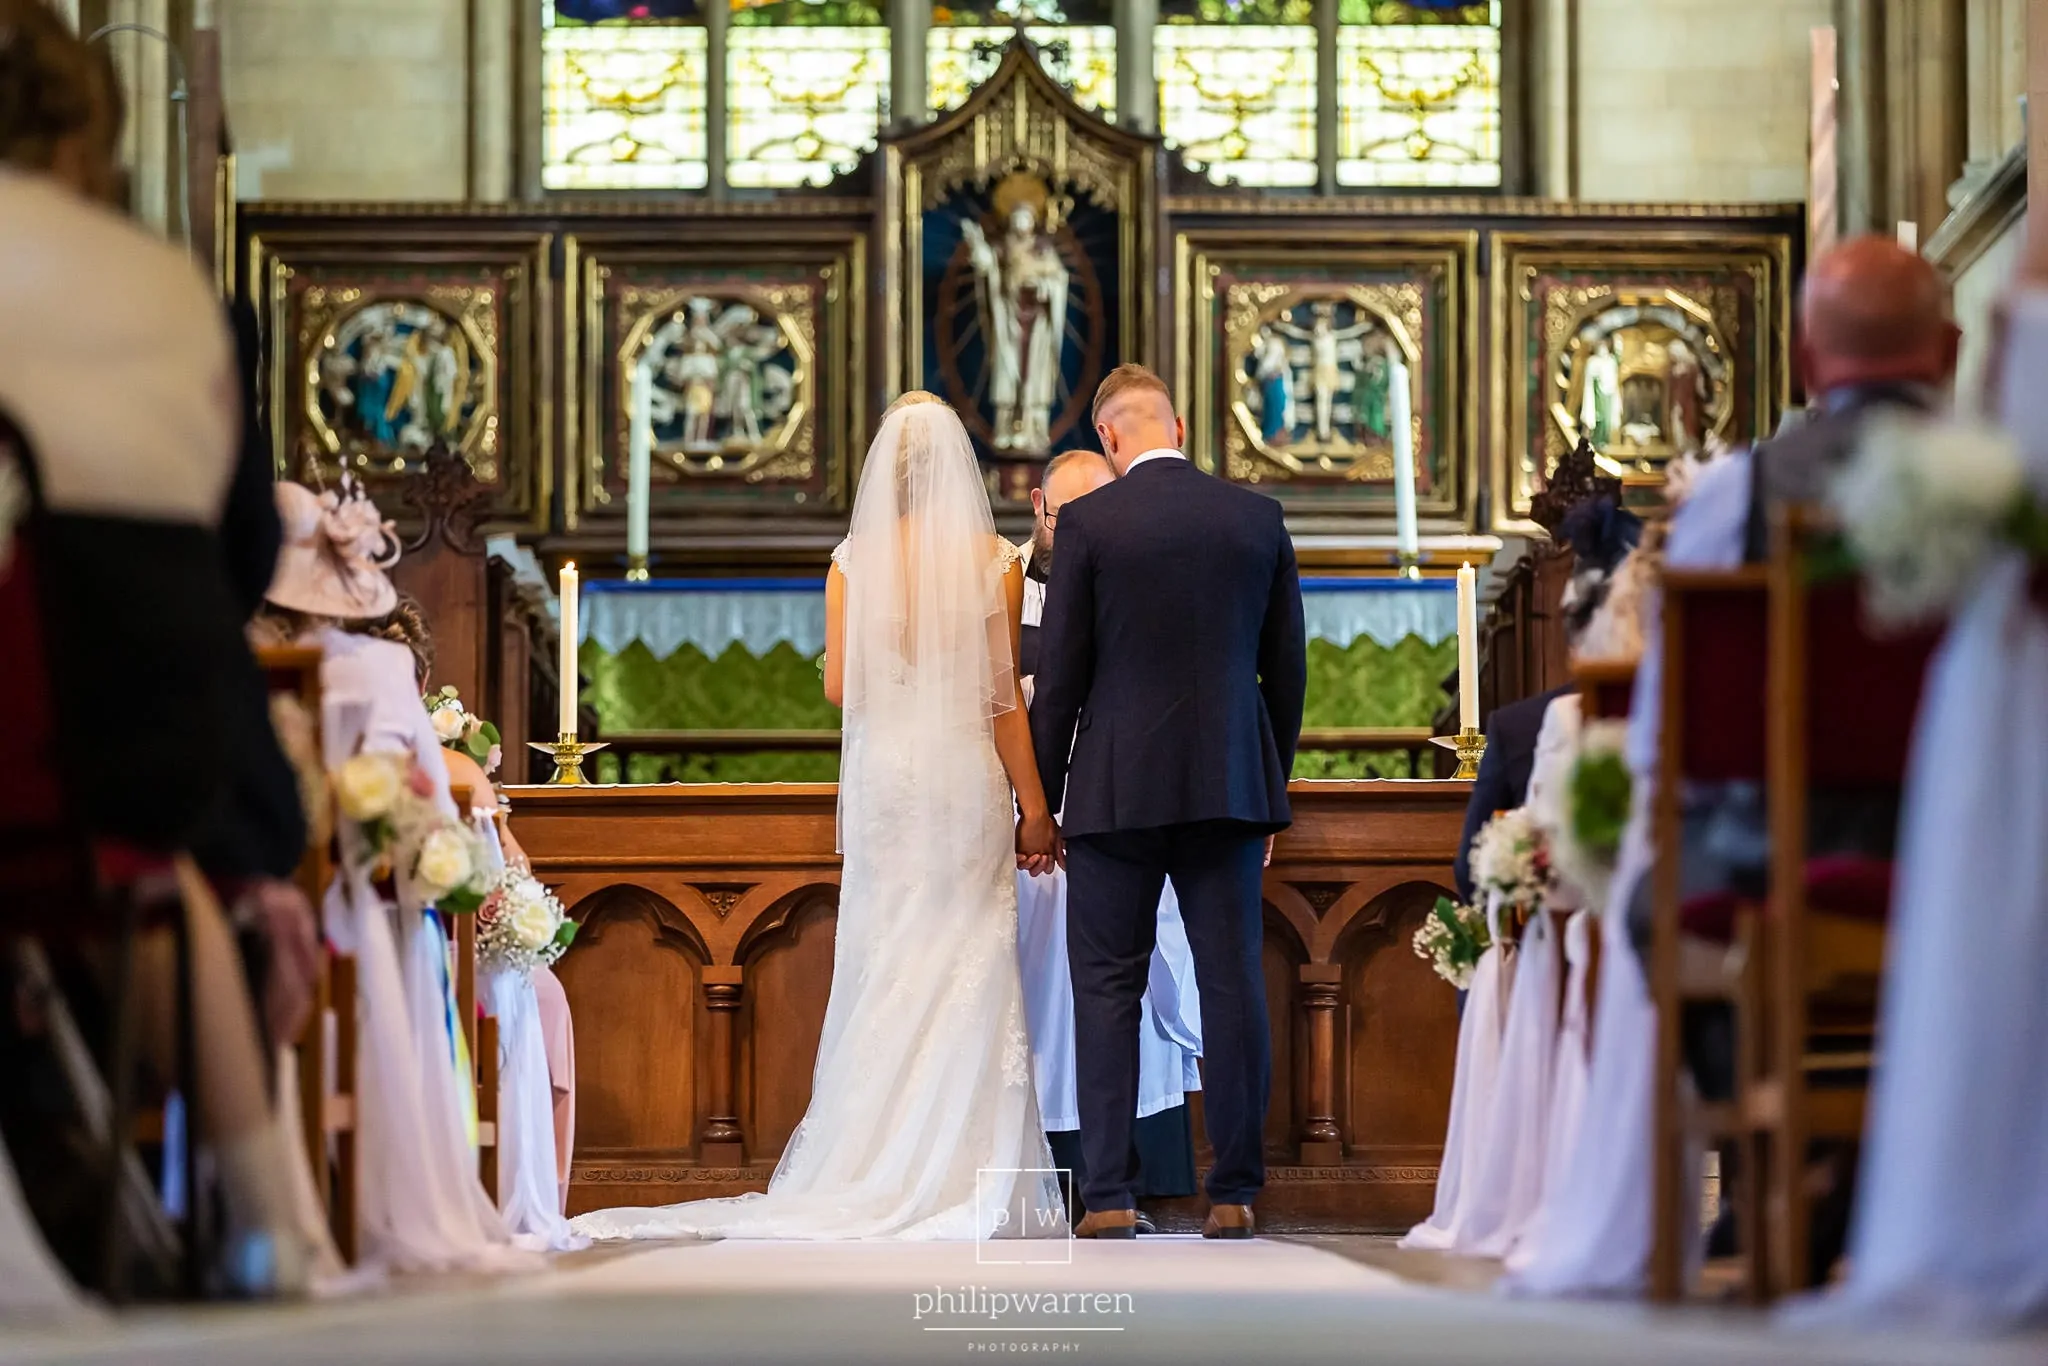 photo taken from at the back of the church lookign down the aisle at the bride and groom holding hands during the ceremony at st marys church in chepstow